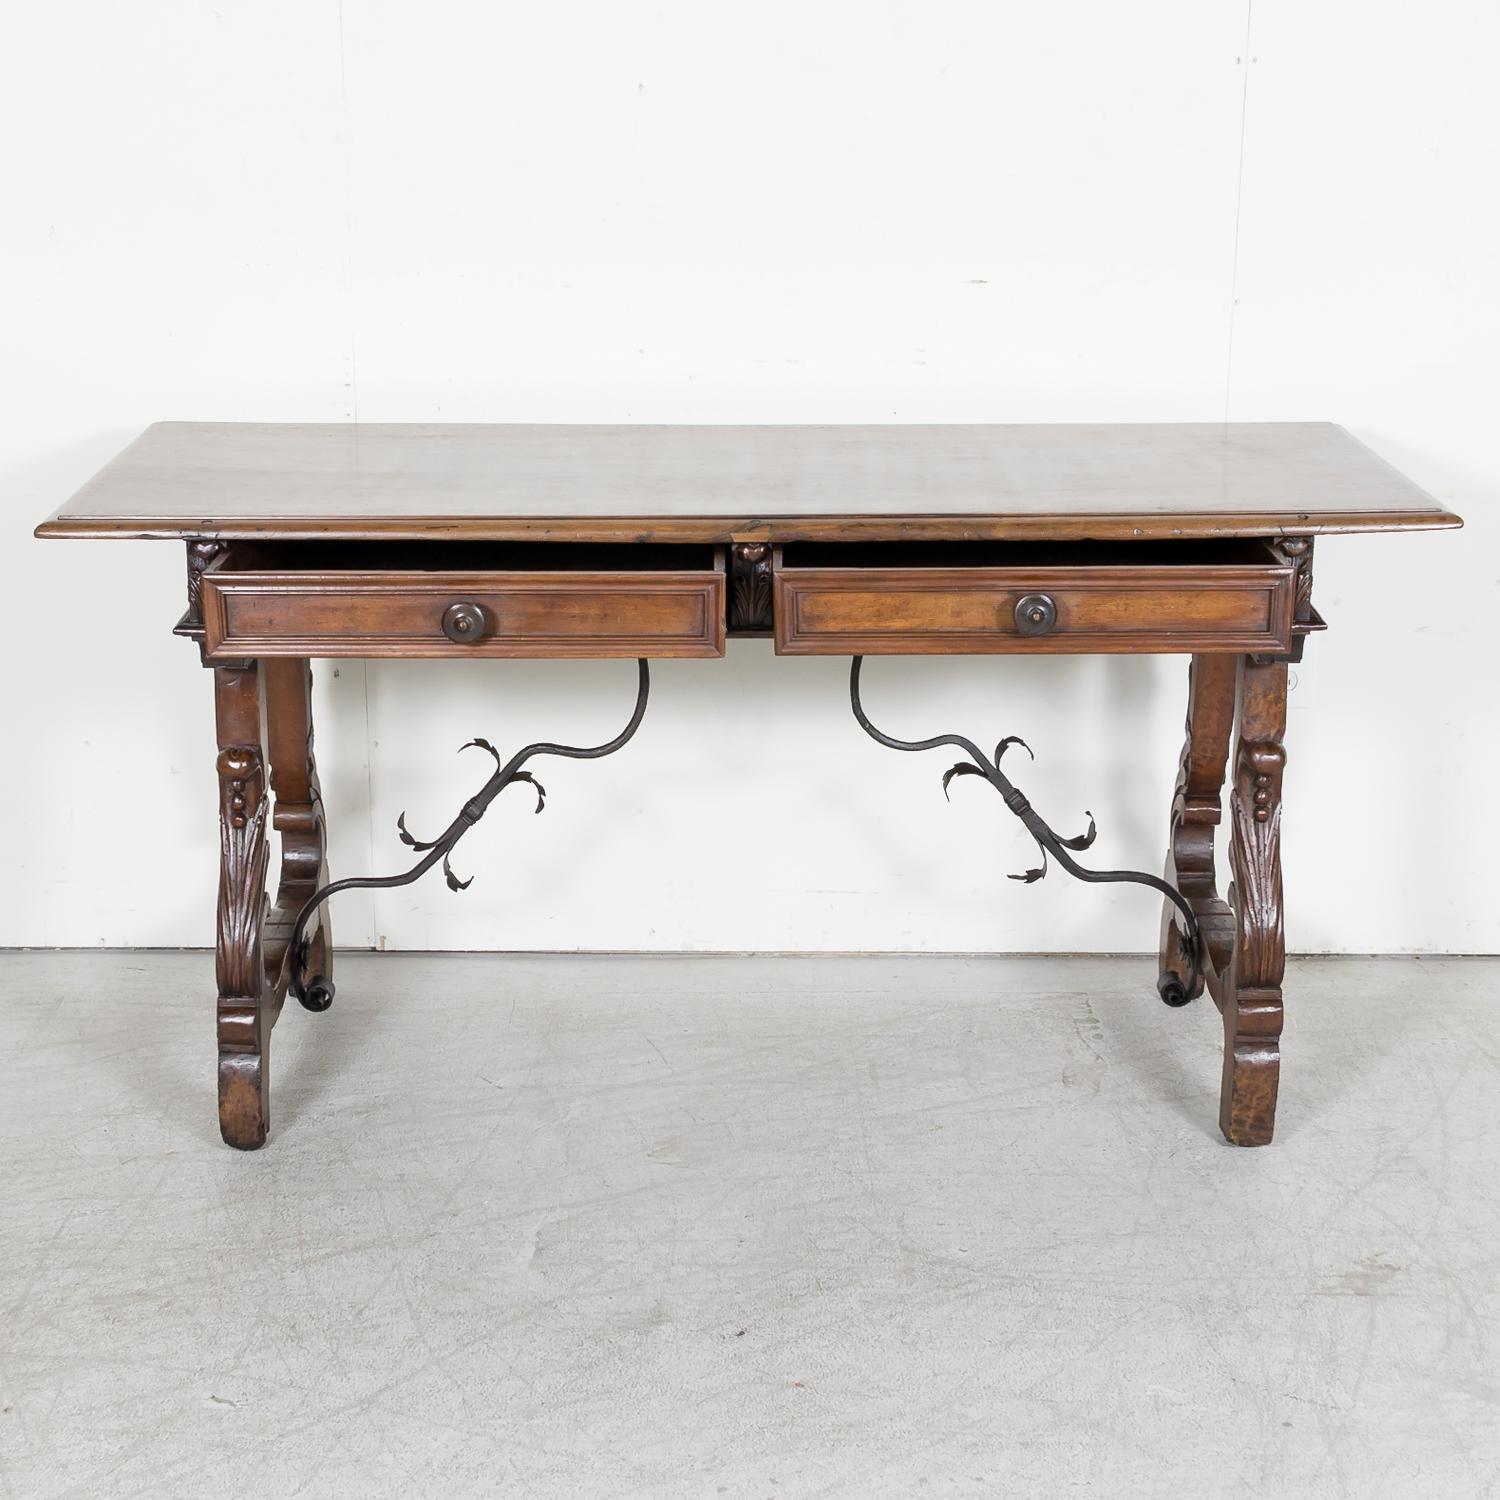 Iron 19th Century Italian Baroque Style Walnut Fratino Console Table with Drawers